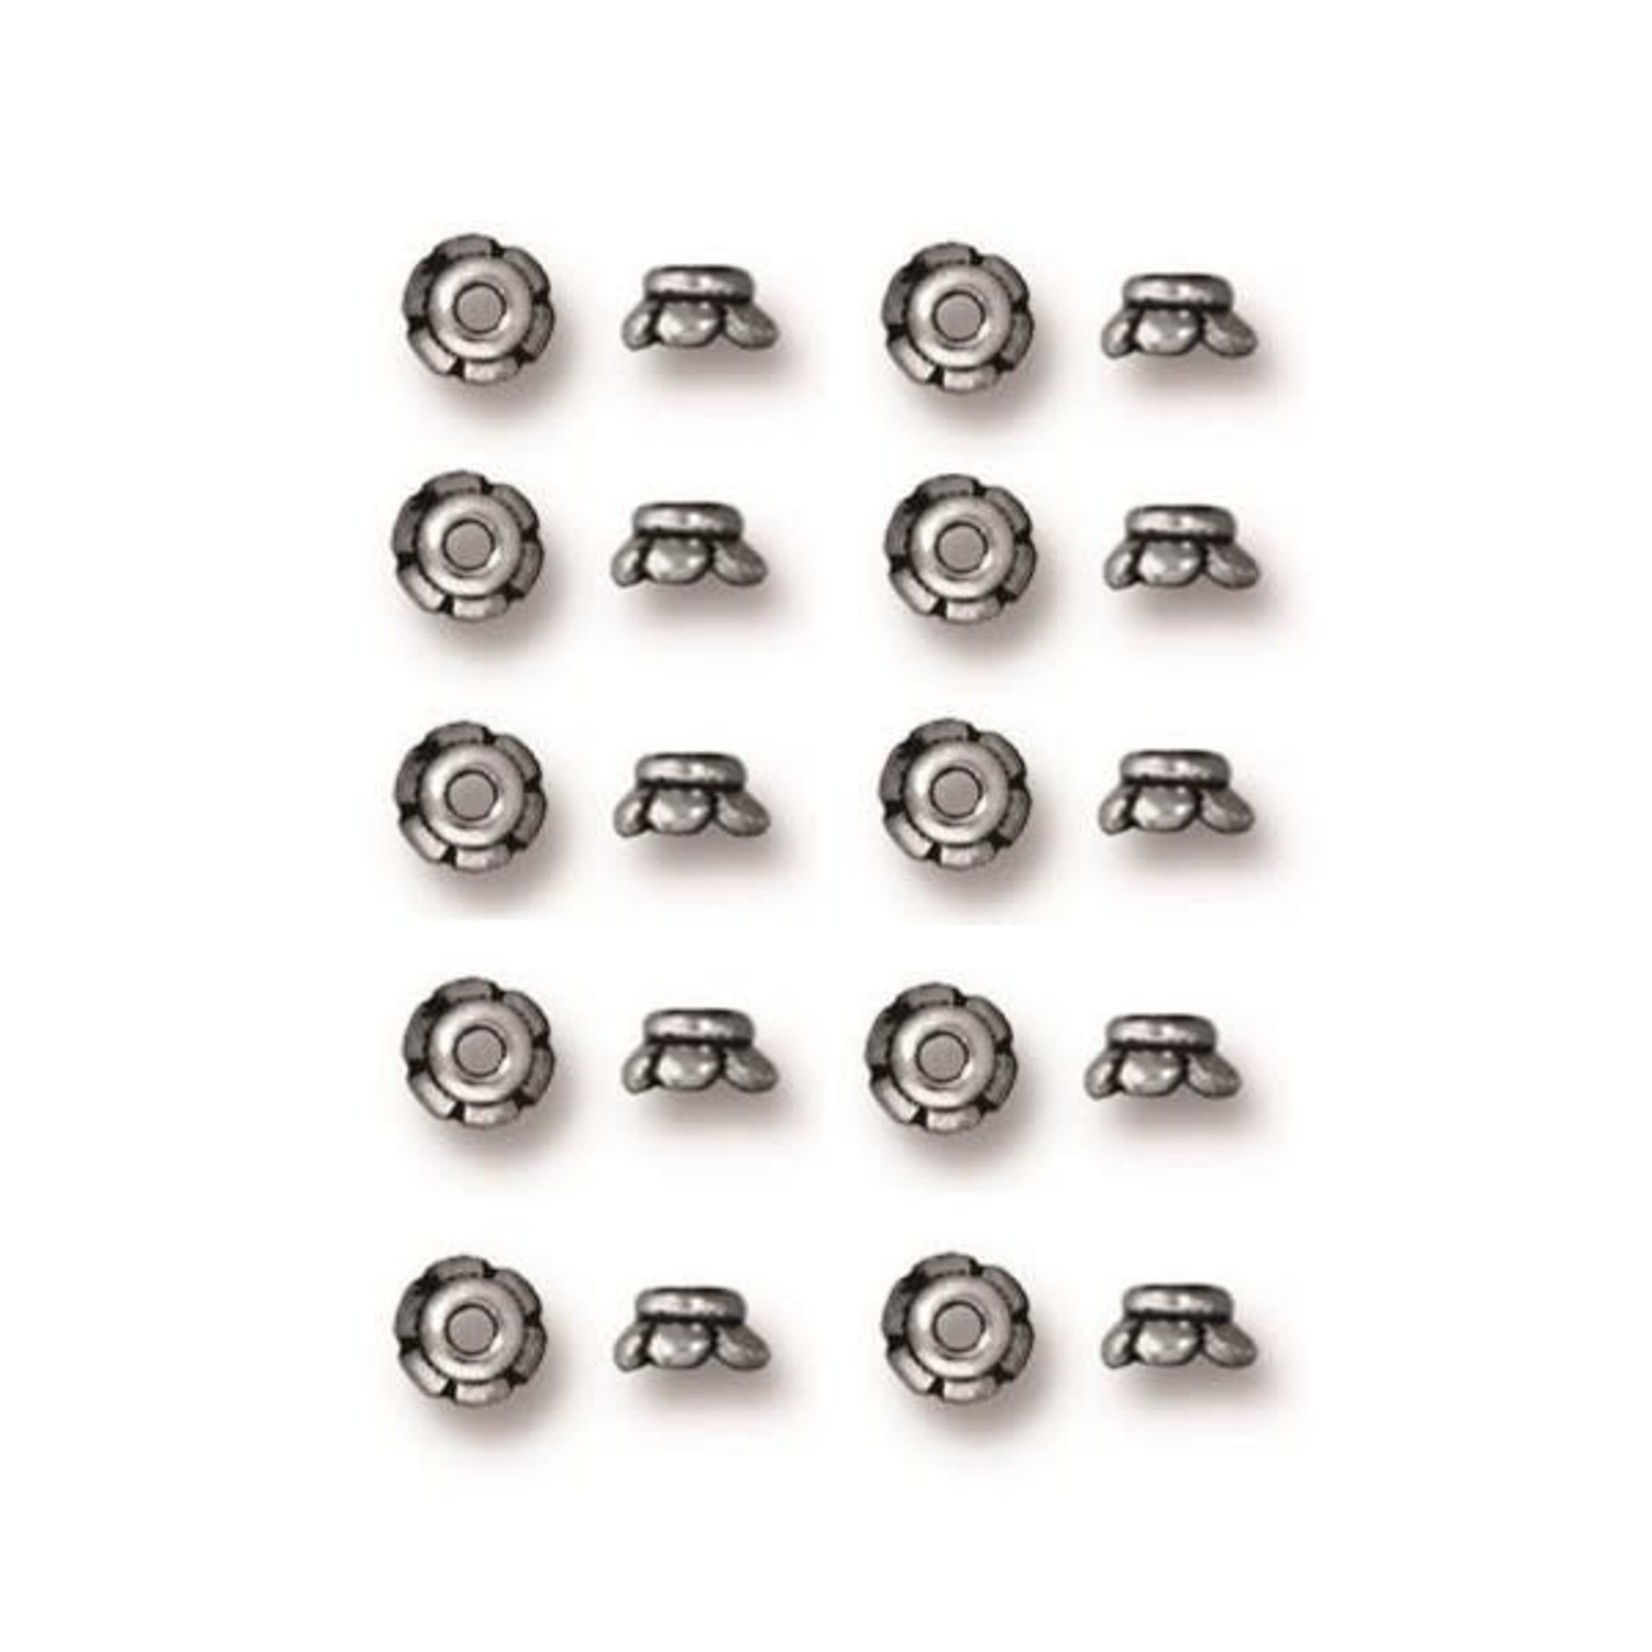 TierraCast Scalloped 4mm Bead Cap Antique Silver Plated - 20 pieces